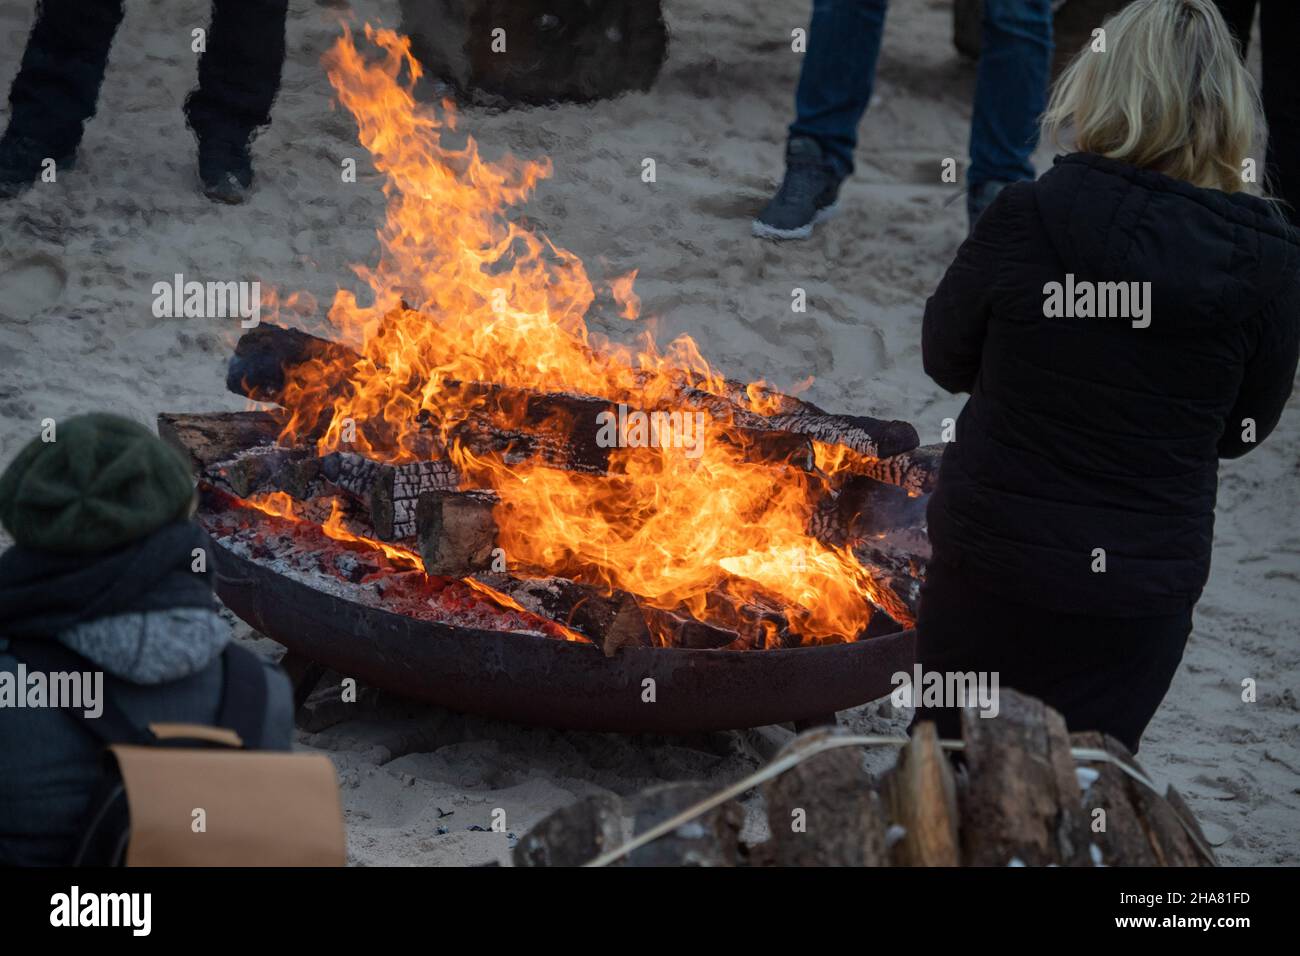 Binz, Germany. 11th Dec, 2021. A fire blazes in a fire bowl on the  snow-covered Baltic Sea beach on Usedom. In the foreground, the lettering  of a mulled wine tavern can be